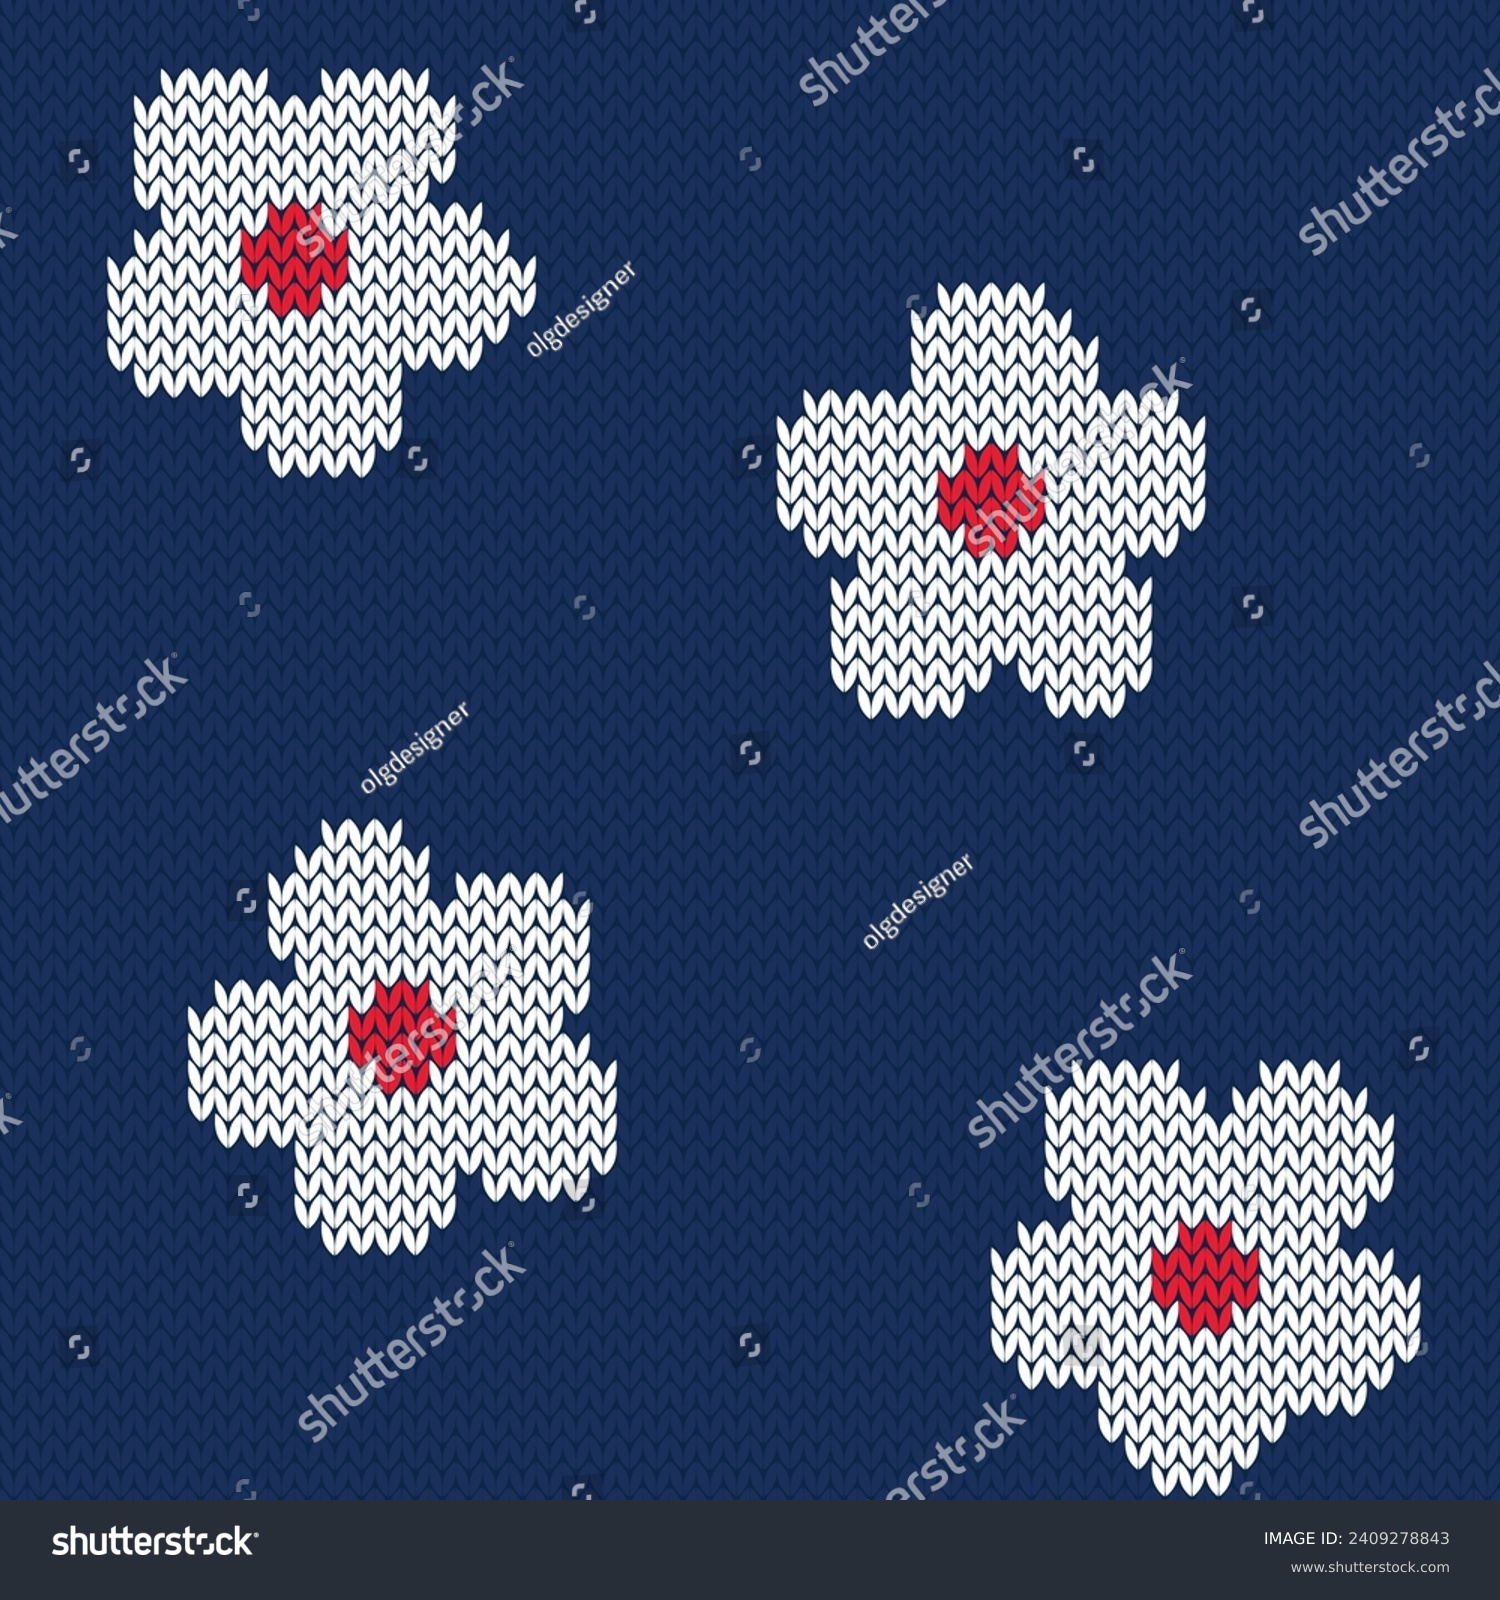 Floral knitted seamless pattern 70s . White flowers on navy blue background. Retro style. Vector illustration. #2409278843